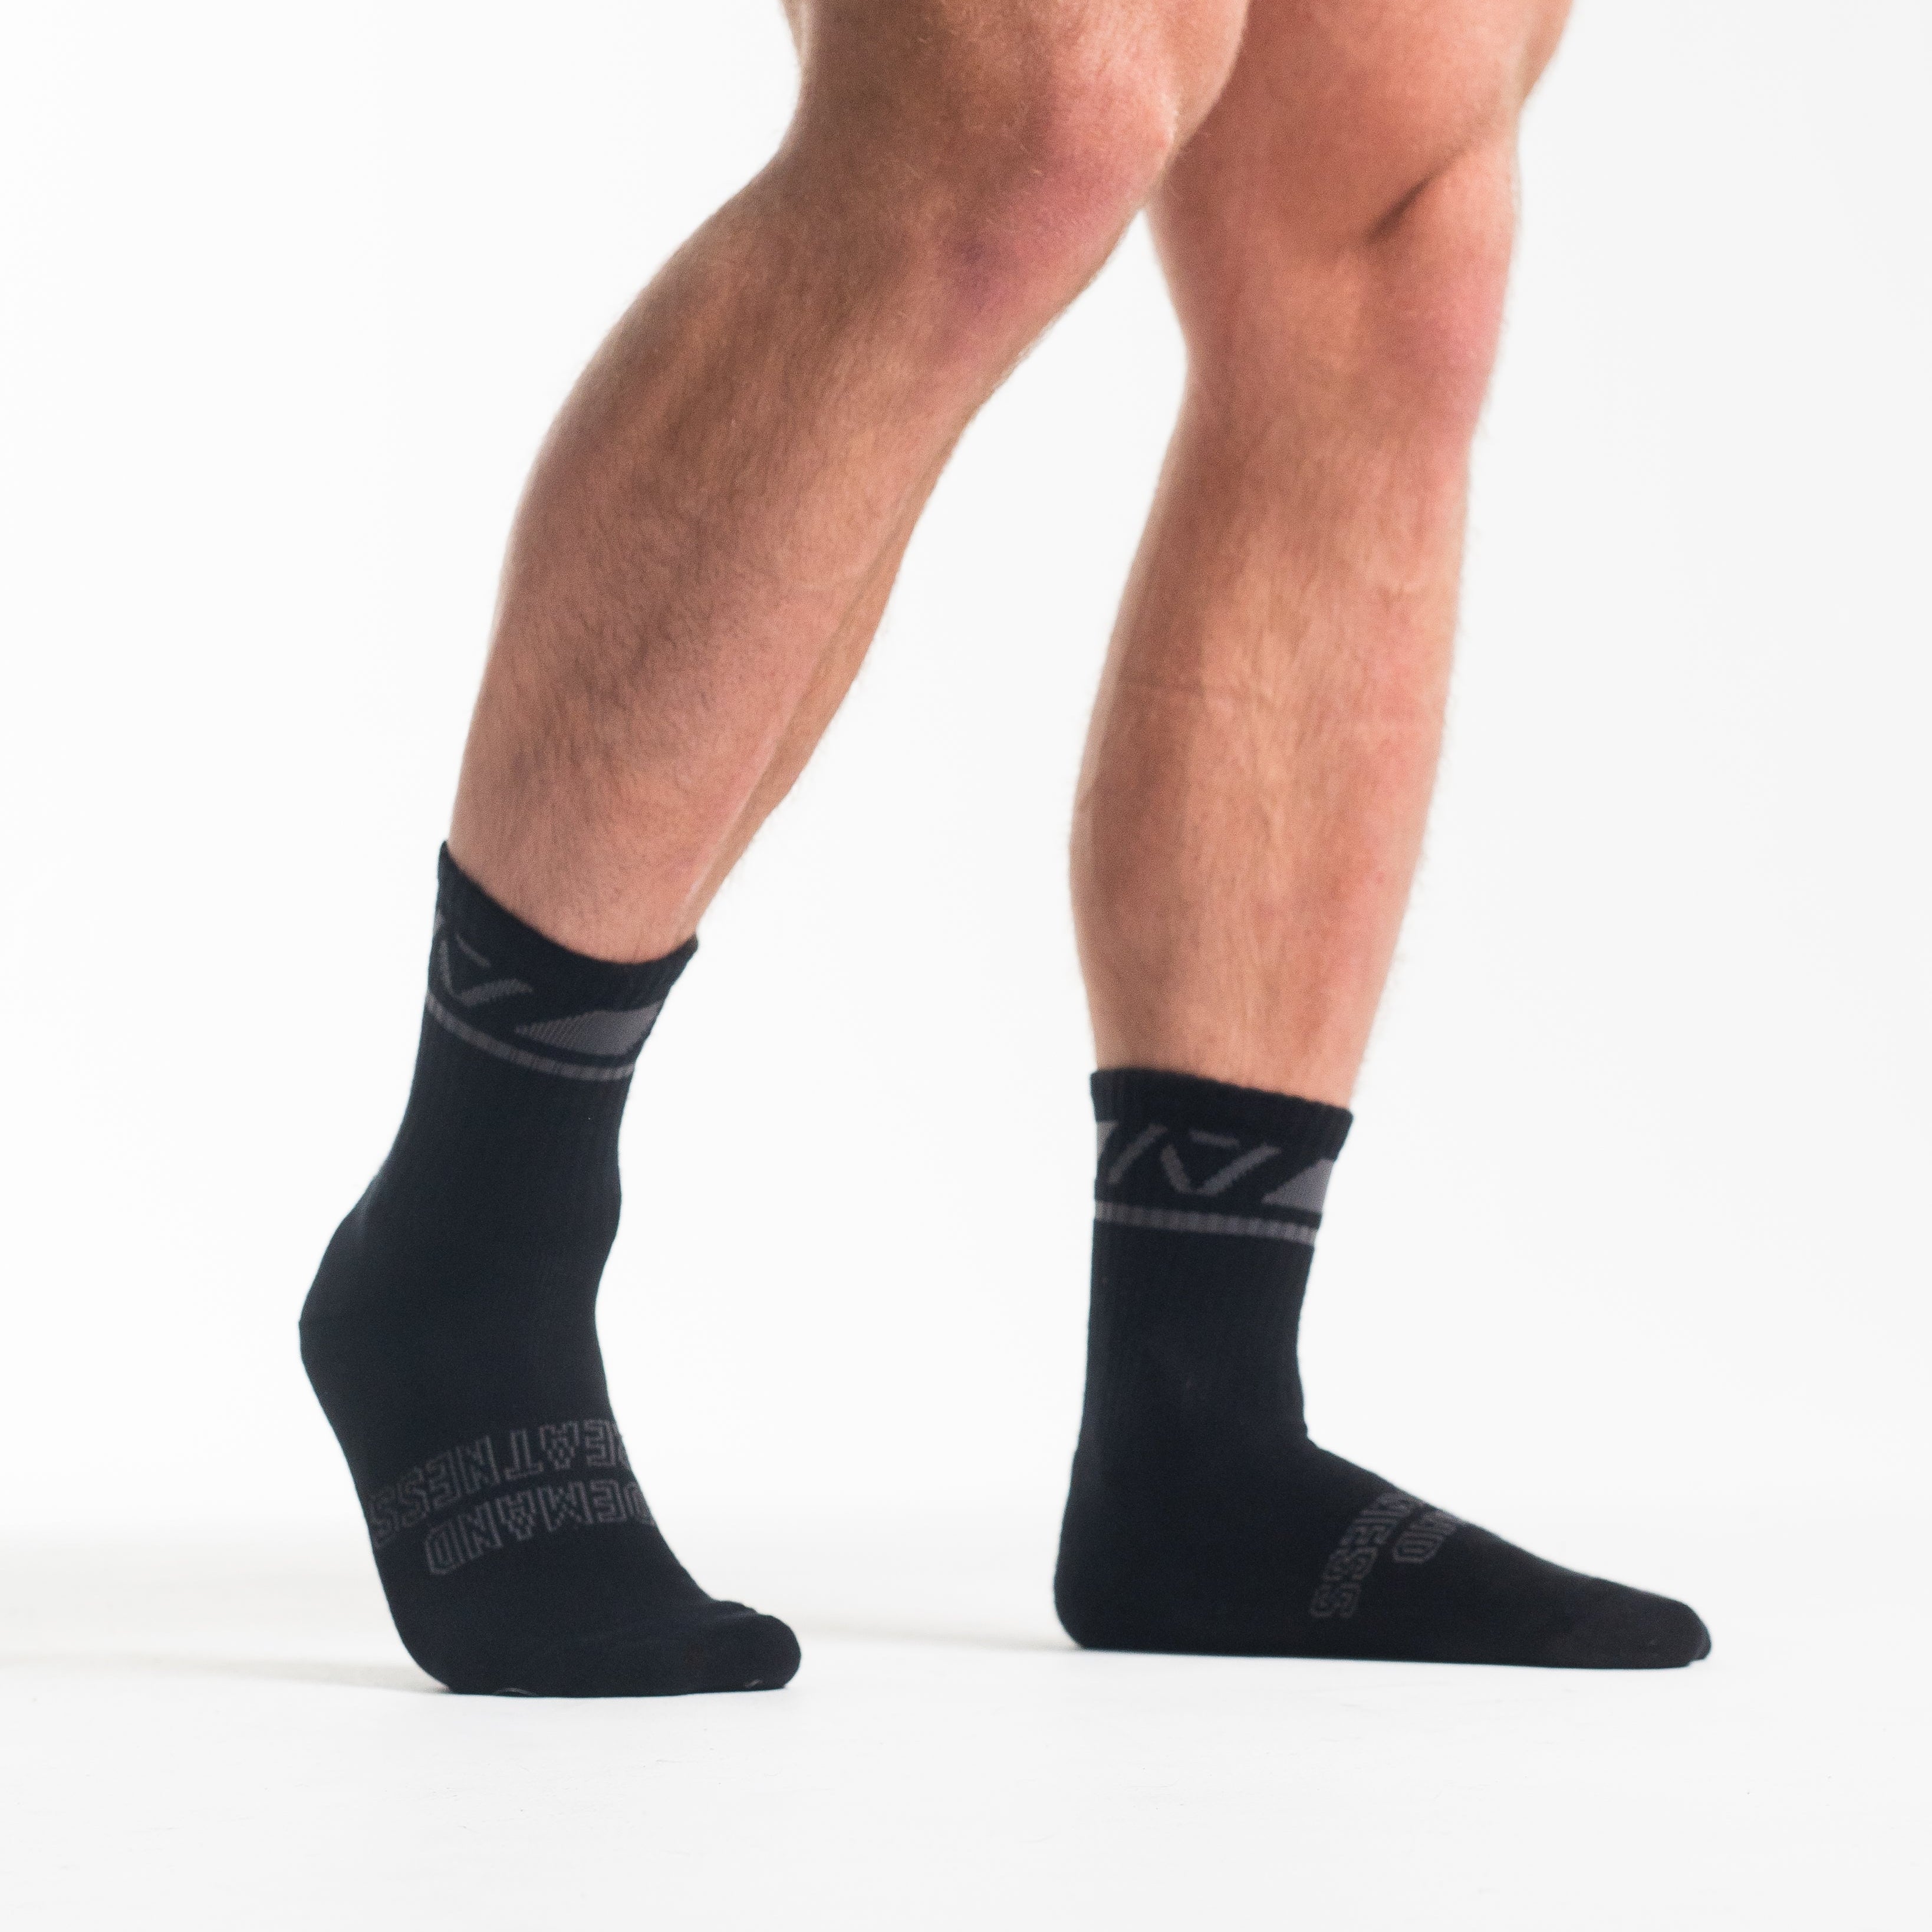 A7 Shadow Stone Crew socks showcase dark grey logos to keep contrast at a minimum and let your energy show on the platform, in your training or while out and about. The IPF Approved Shadow Stone Meet Kit includes Powerlifting Singlet, A7 Meet Shirt, A7 Zebra Wrist Wraps, A7 Deadlift Socks, Hourglass Knee Sleeves (Stiff Knee Sleeves and Rigor Mortis Knee Sleeves). All A7 Powerlifting Equipment shipping to UK, Norway, Switzerland and Iceland.